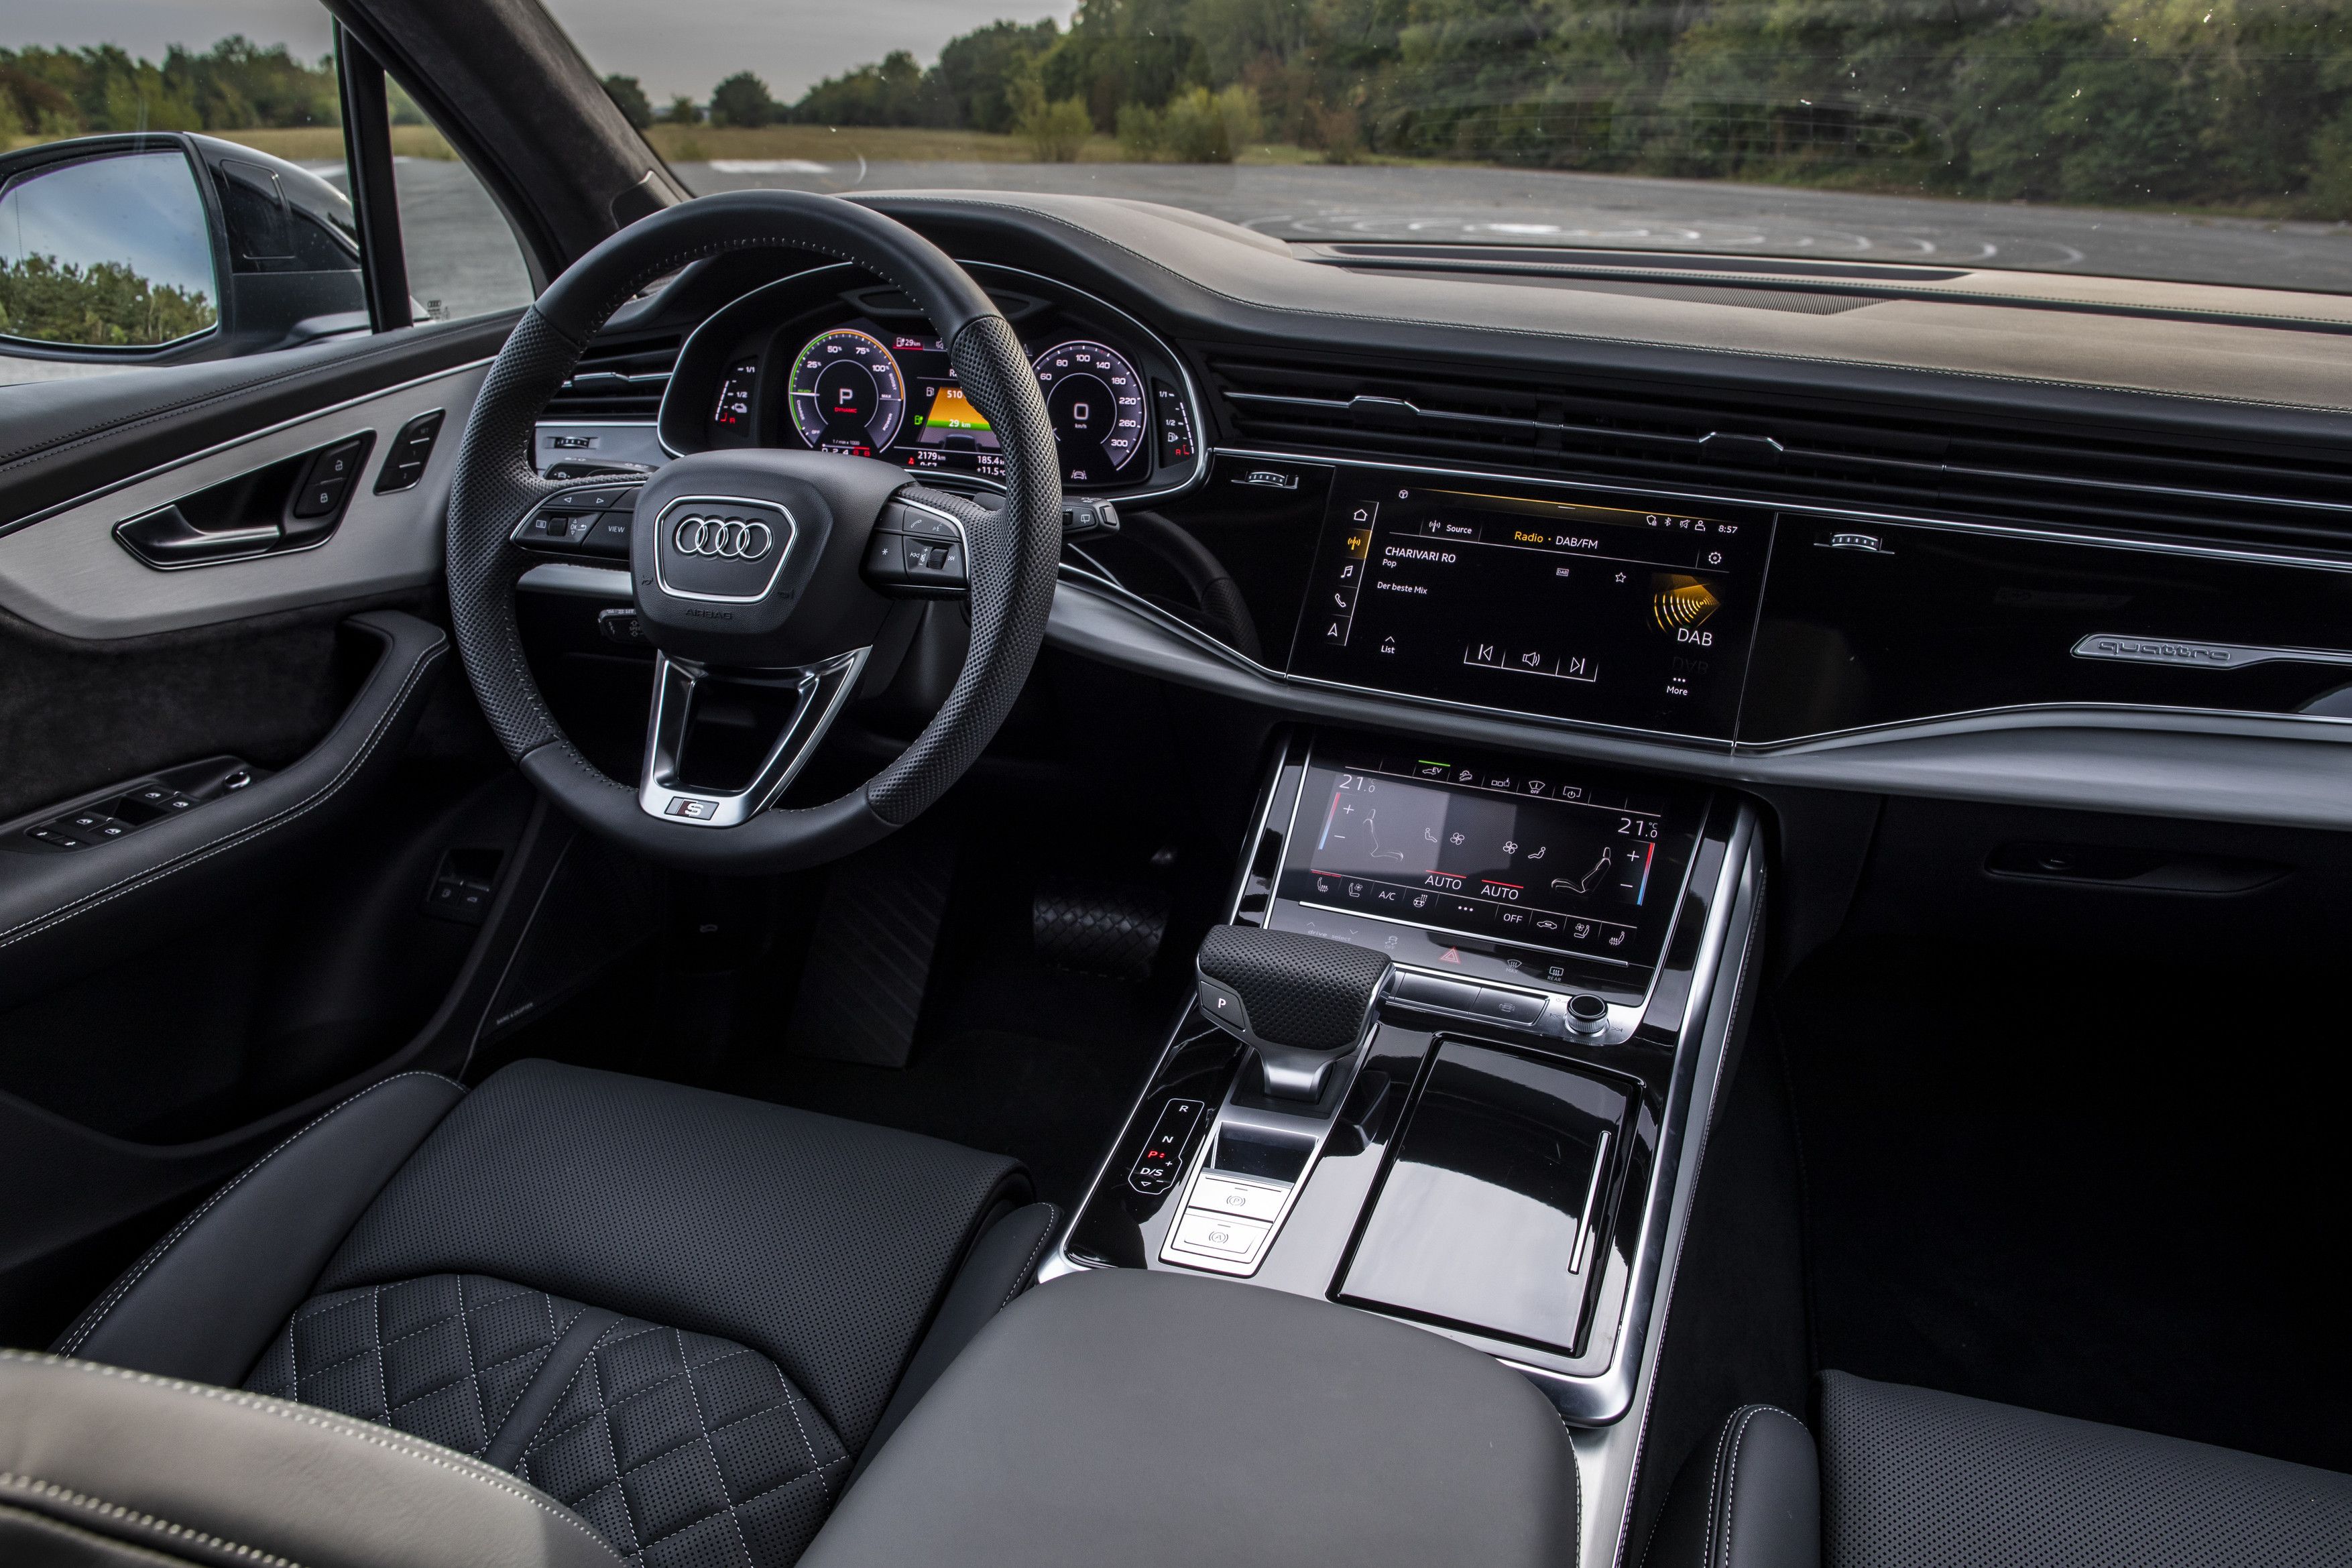 2021 Audi Q7 Review Pricing And Specs